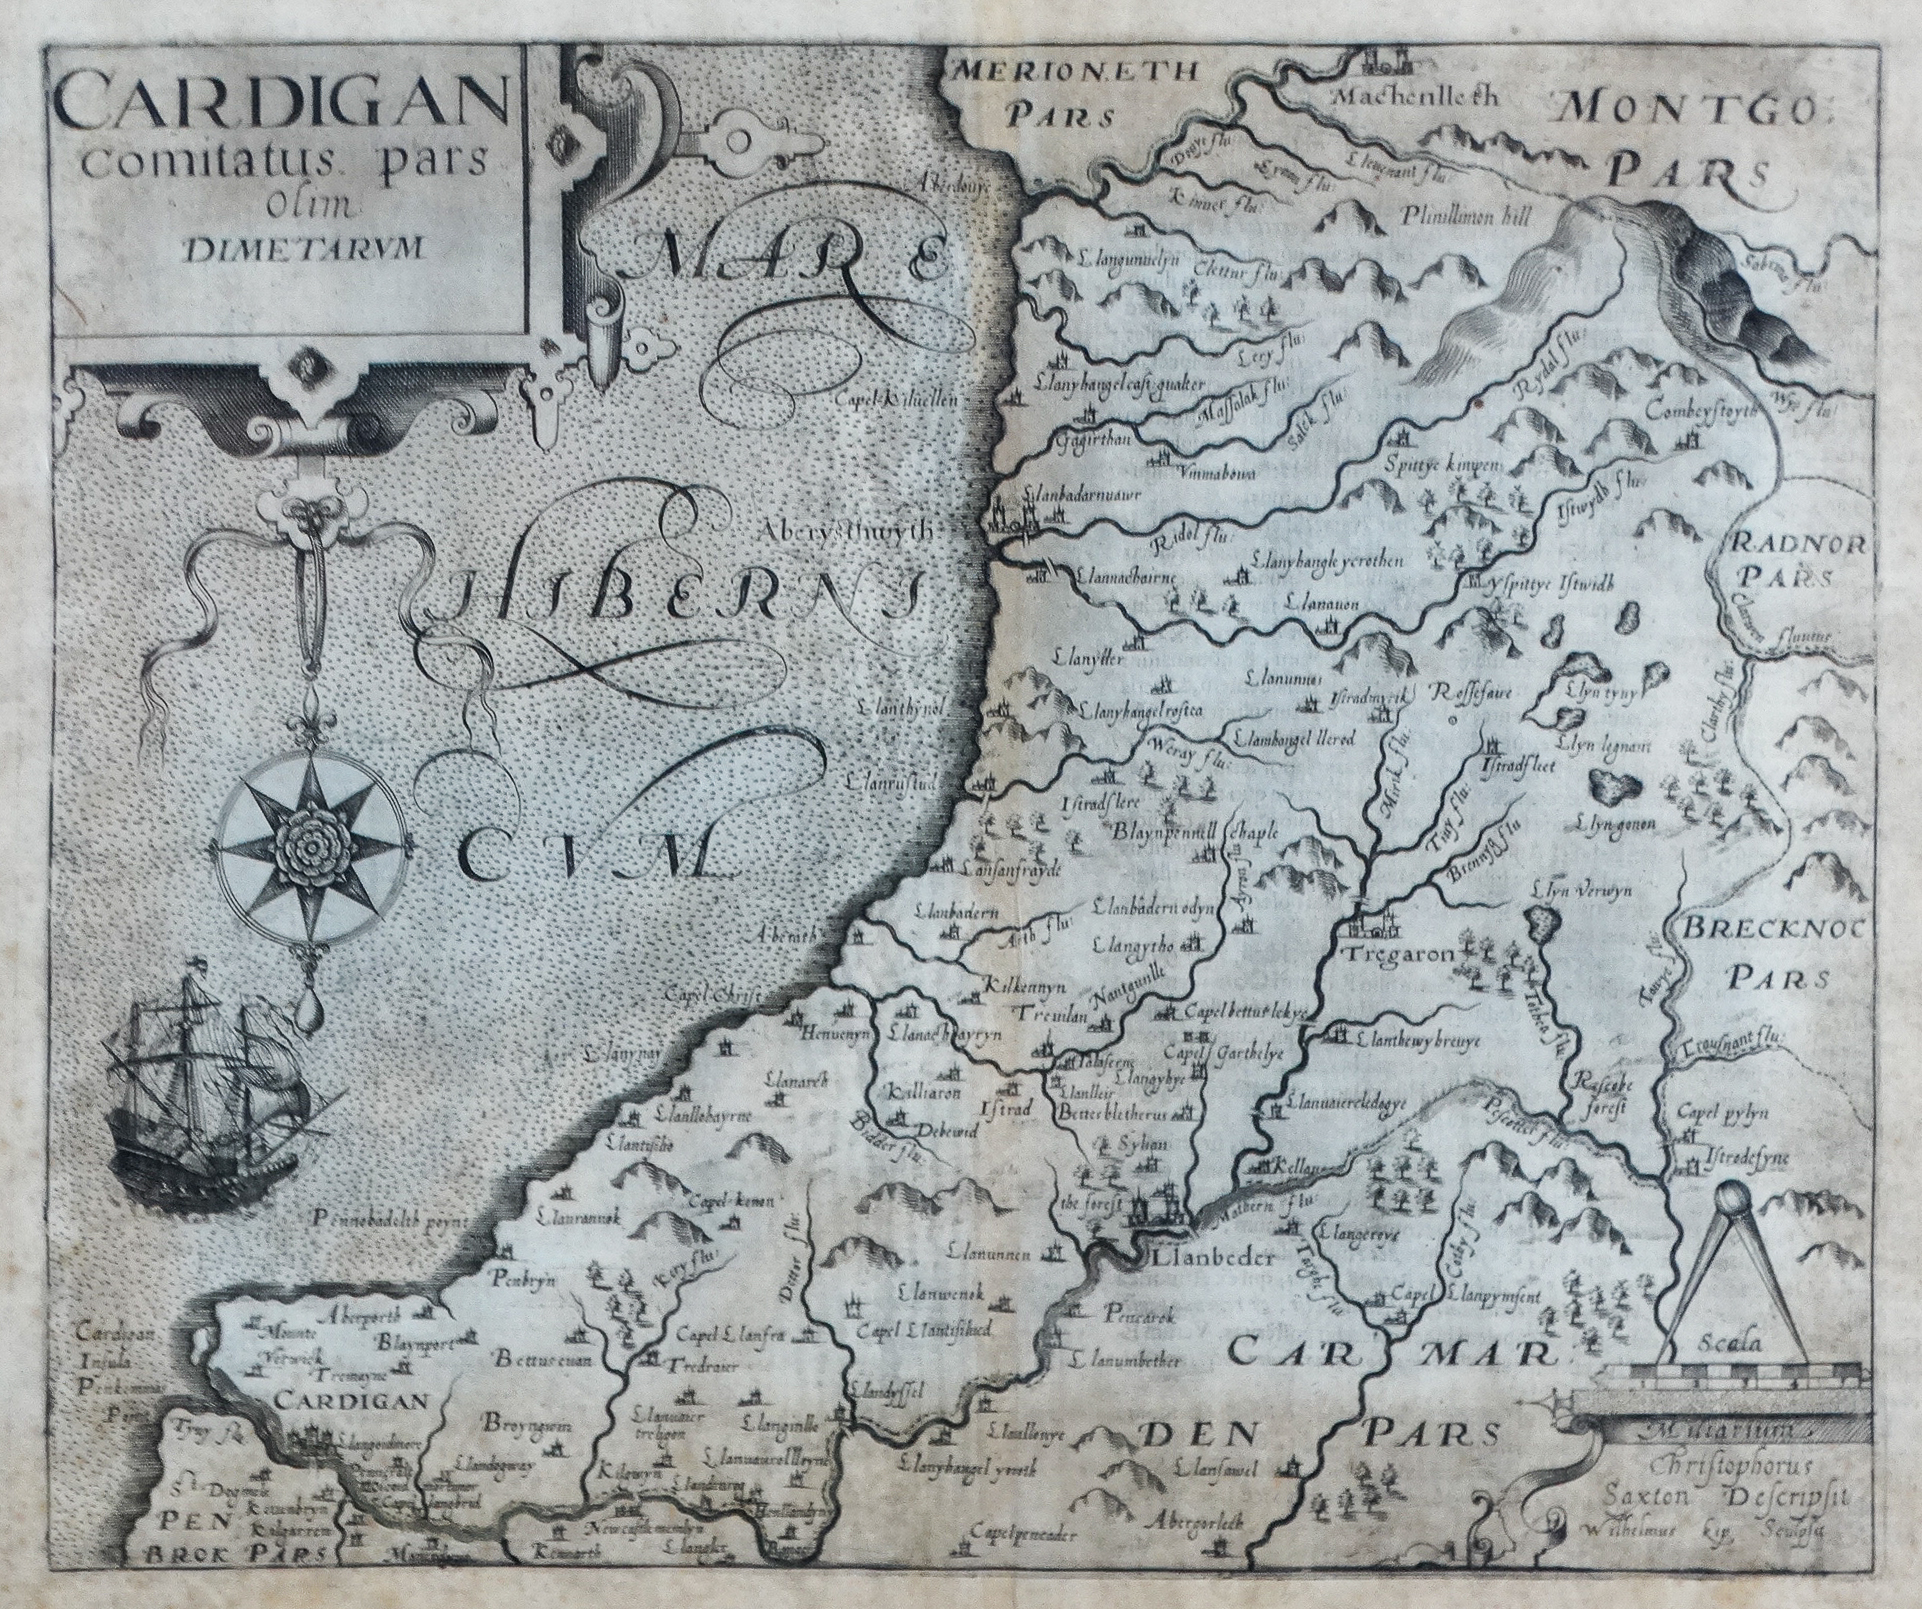 After Christopher Saxton, Map of Cardigan - a monochrome engraving, 23 x 32cm.